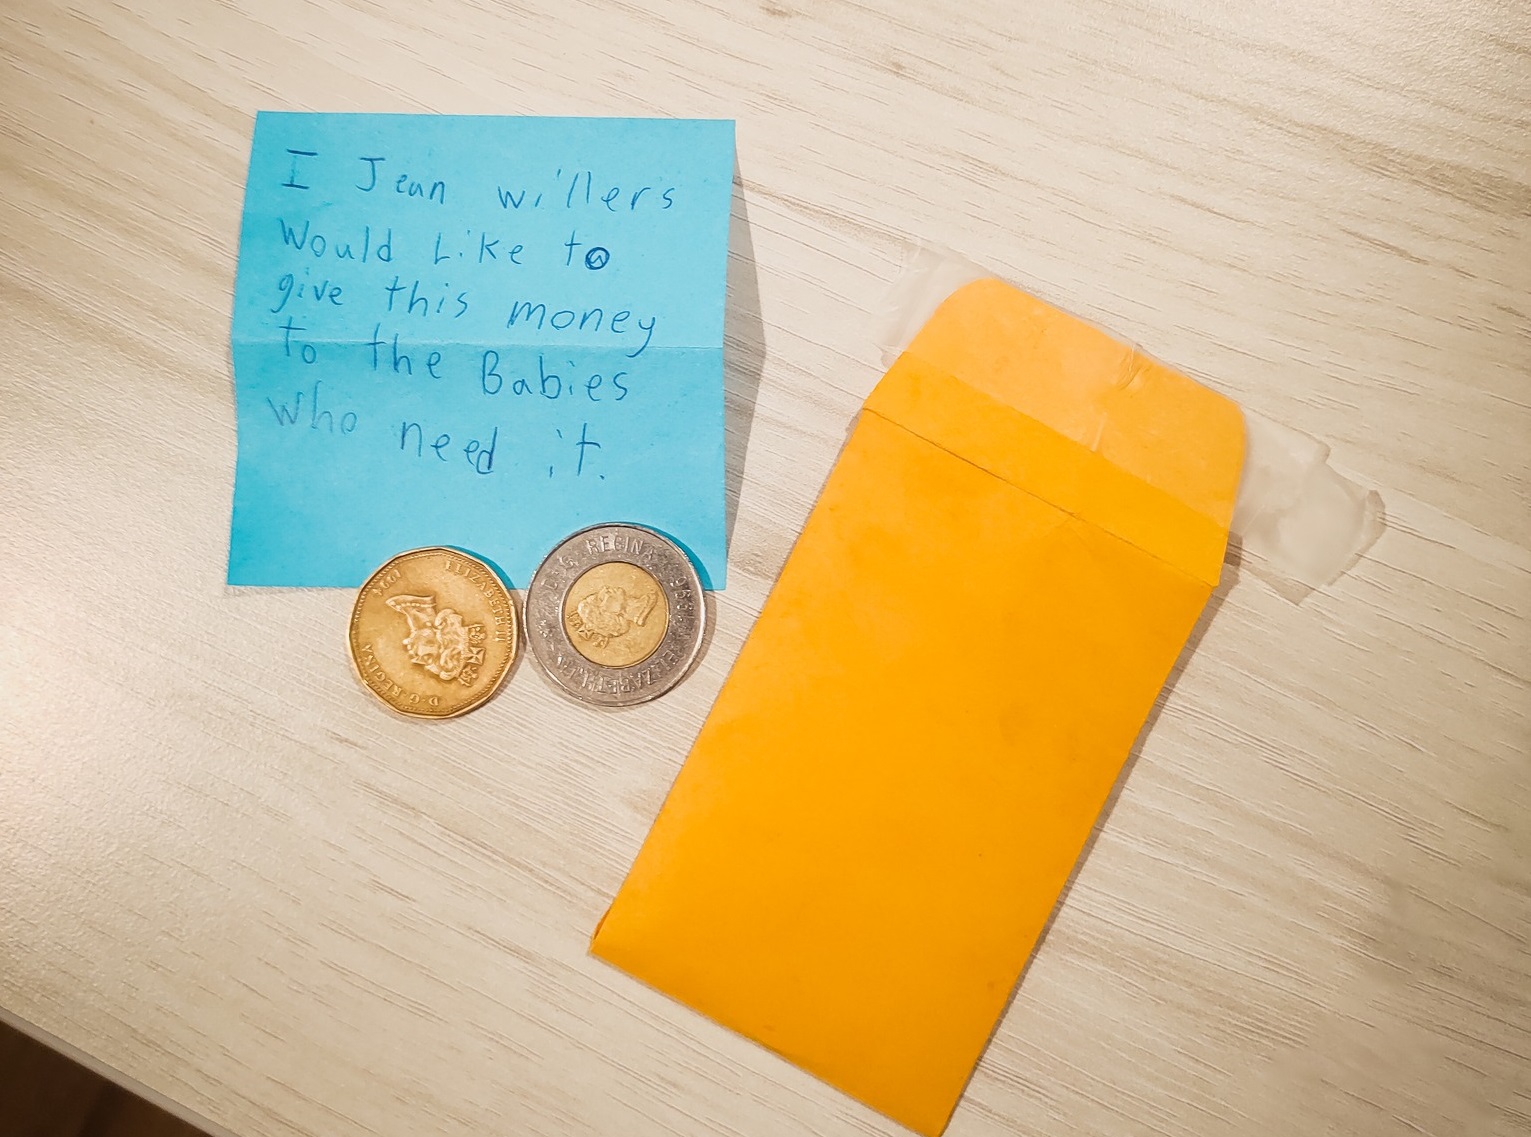 A small yellow manila envelope sits next to a toonie and a loonie sitting on top a blue note that says I Jean Willers would like to give this money to the babies who need it.